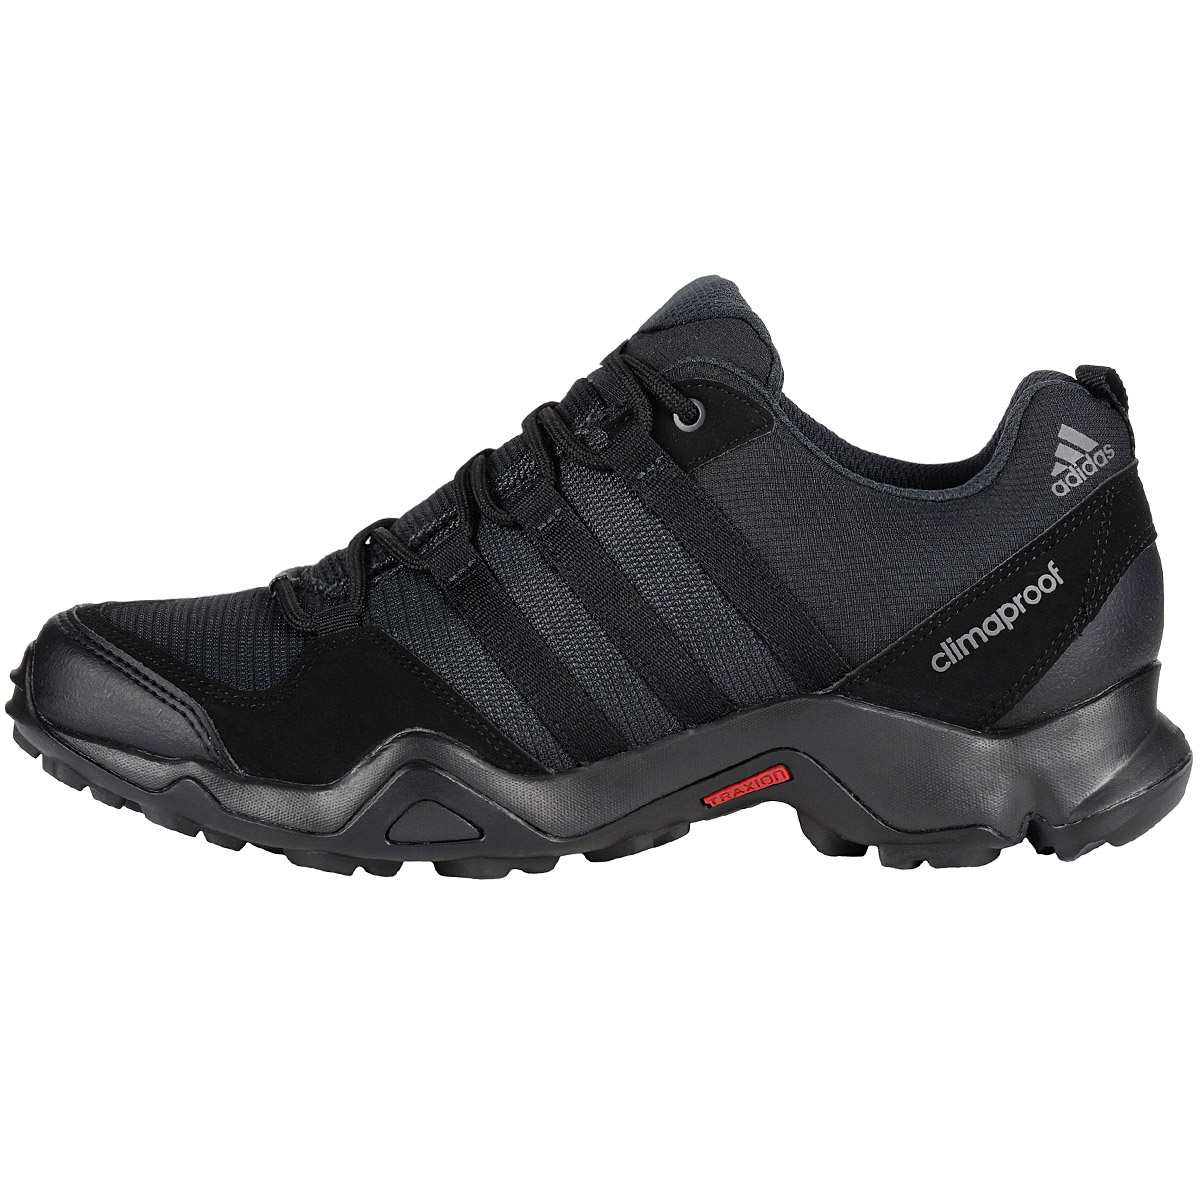 adidas AX 2 Climaproof Black Mens Trail Shoes Hiking Shoes Outdoor NEW ...